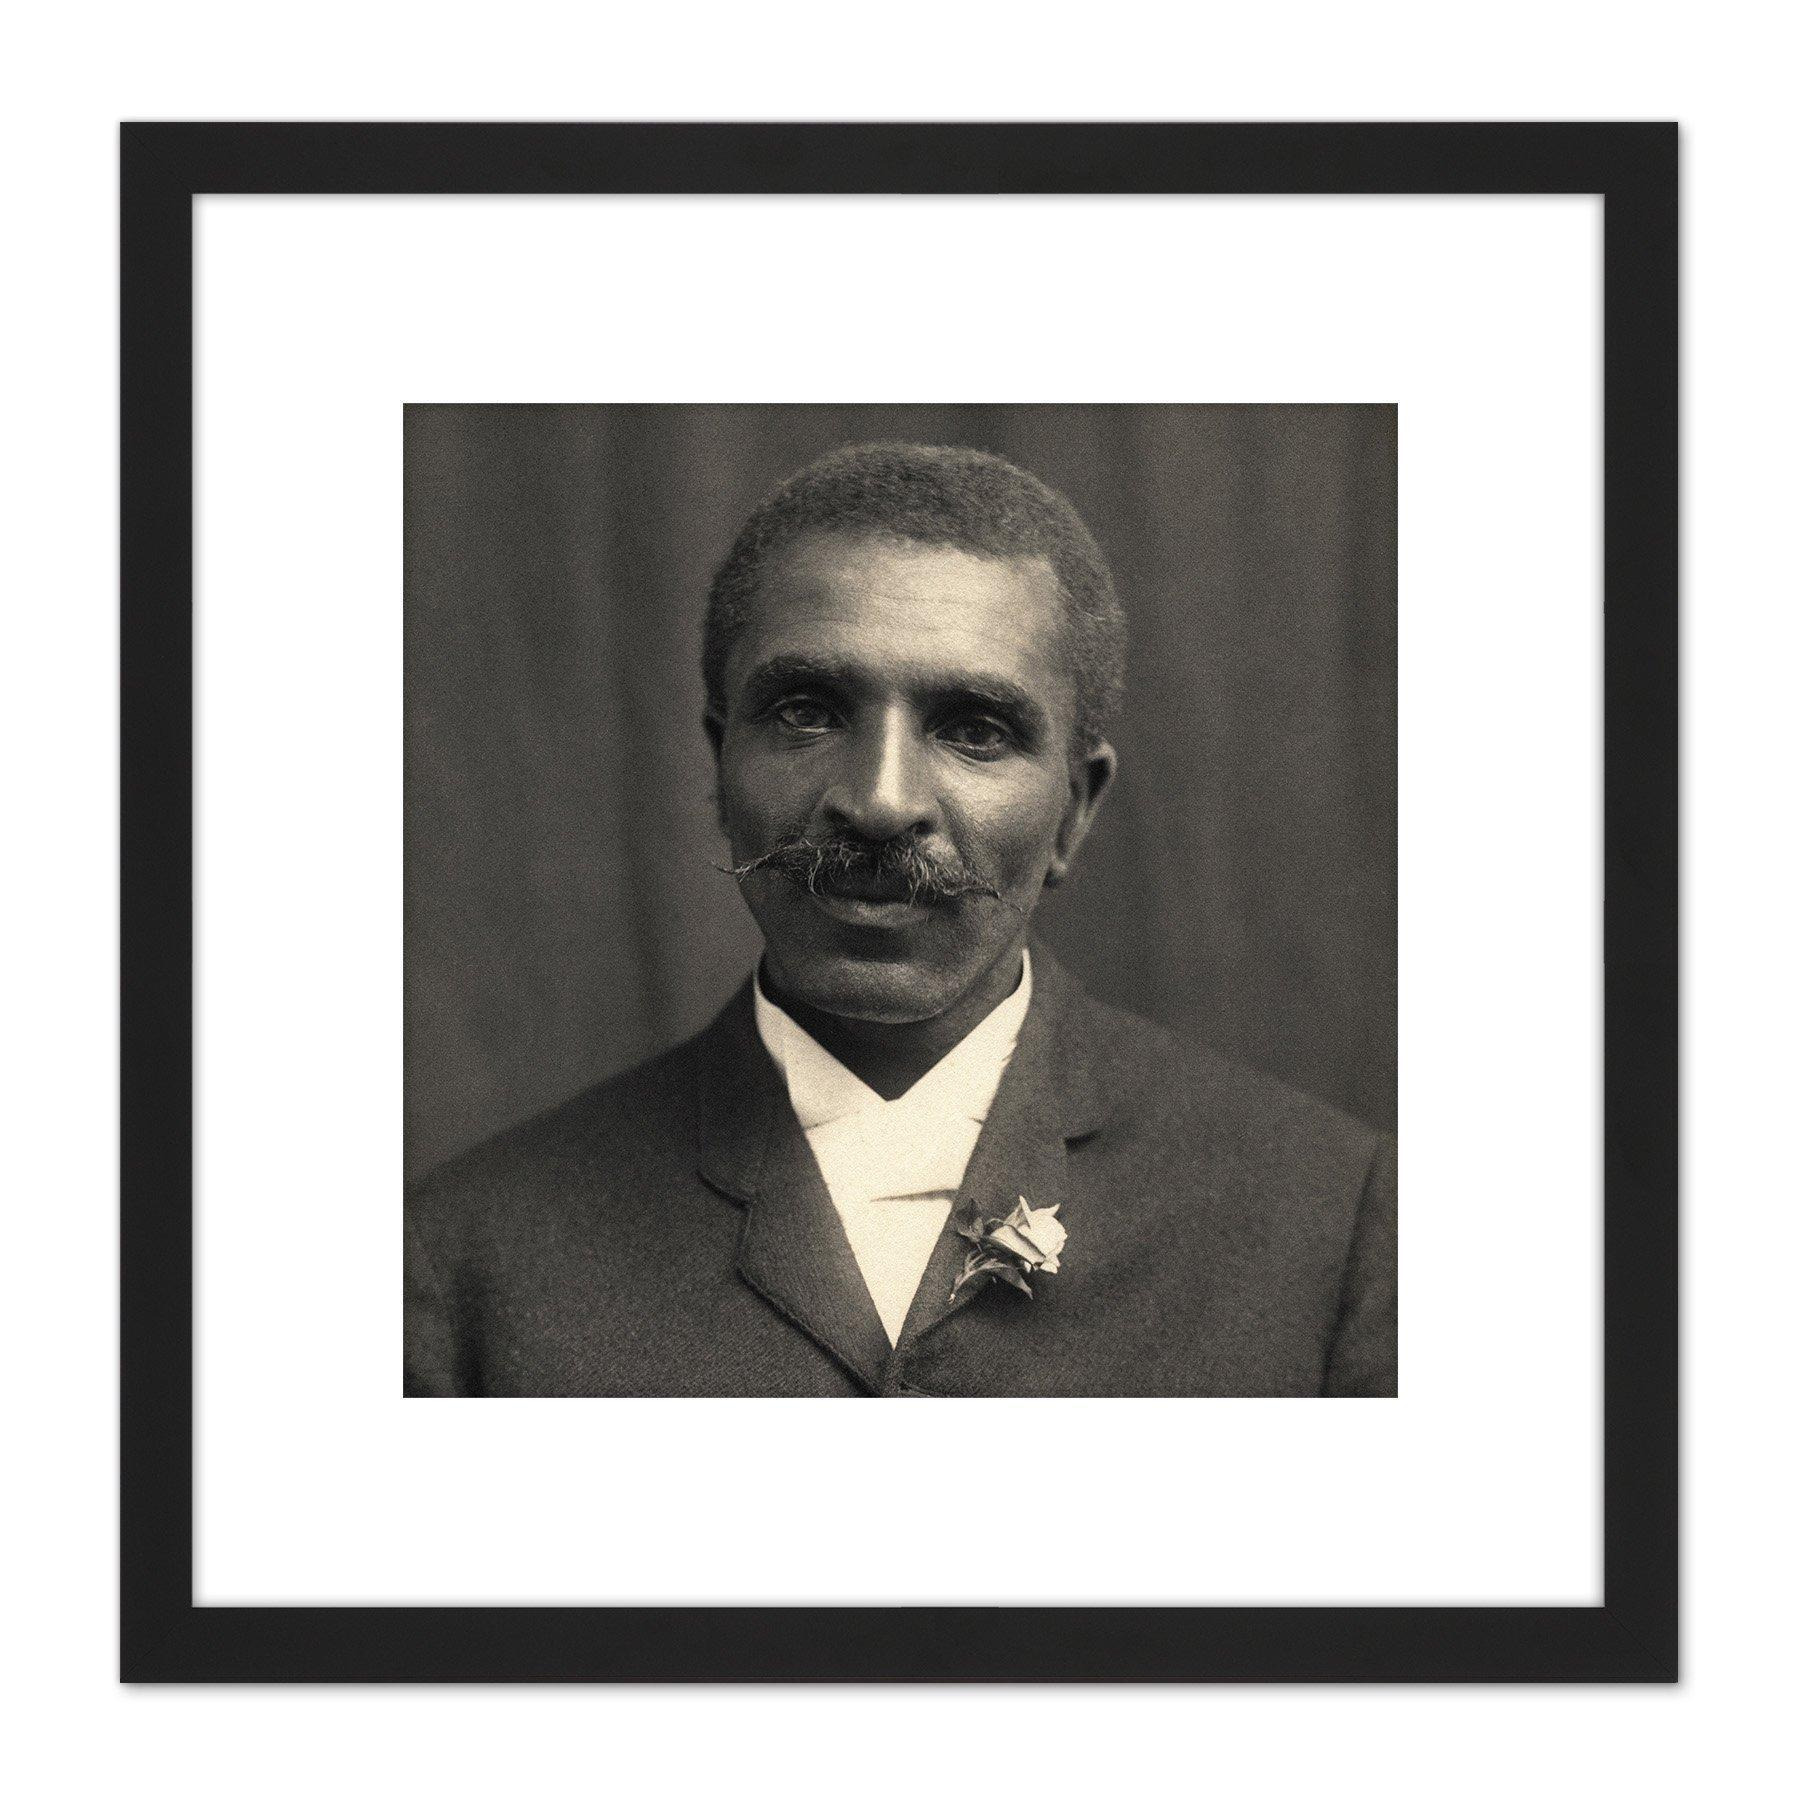 Portrait Botanist George Carver Photo 8X8 Inch Square Wooden Framed Wall Art Print Picture with Mount - image 1